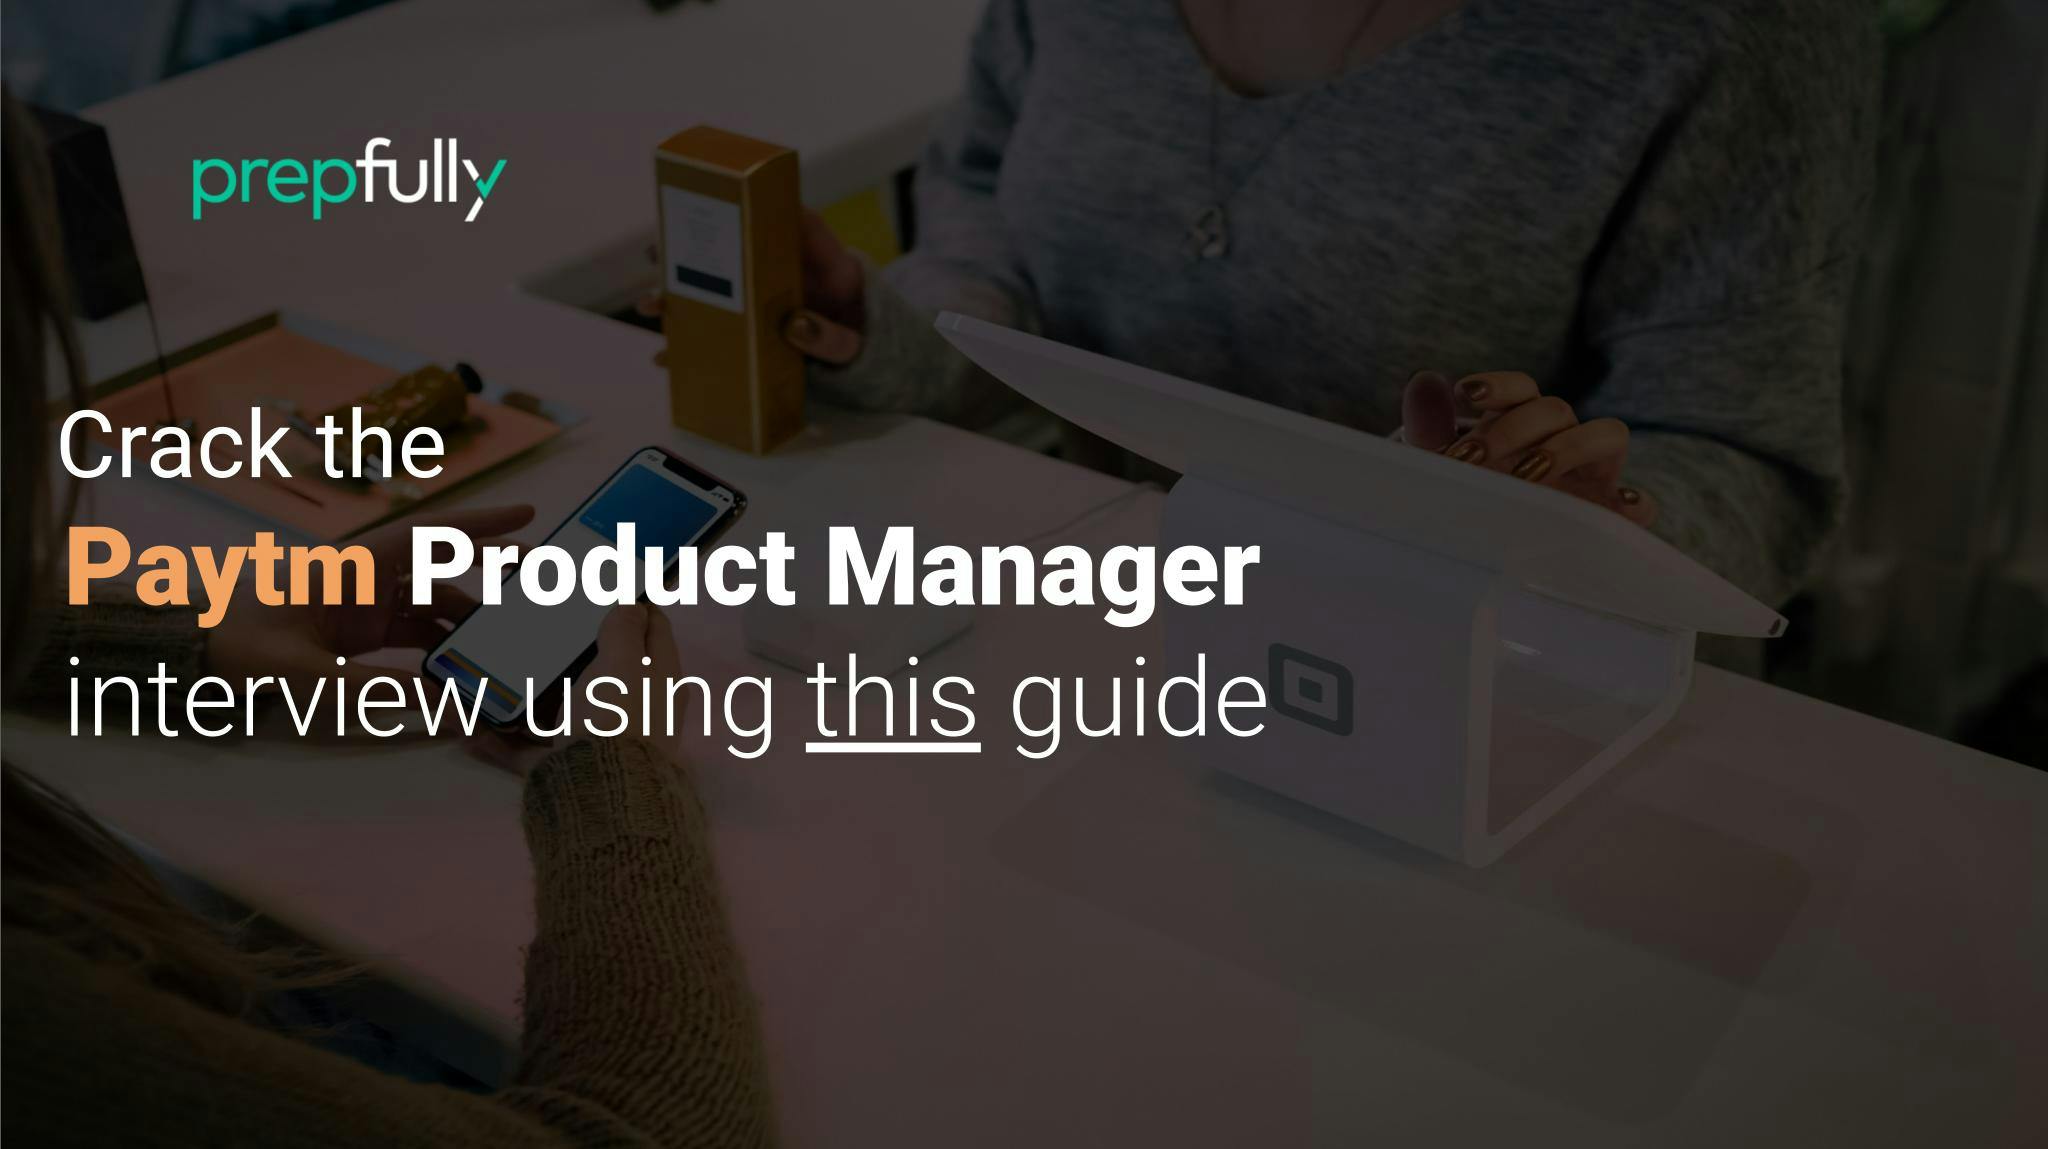 Interview guide for Paytm Product Manager